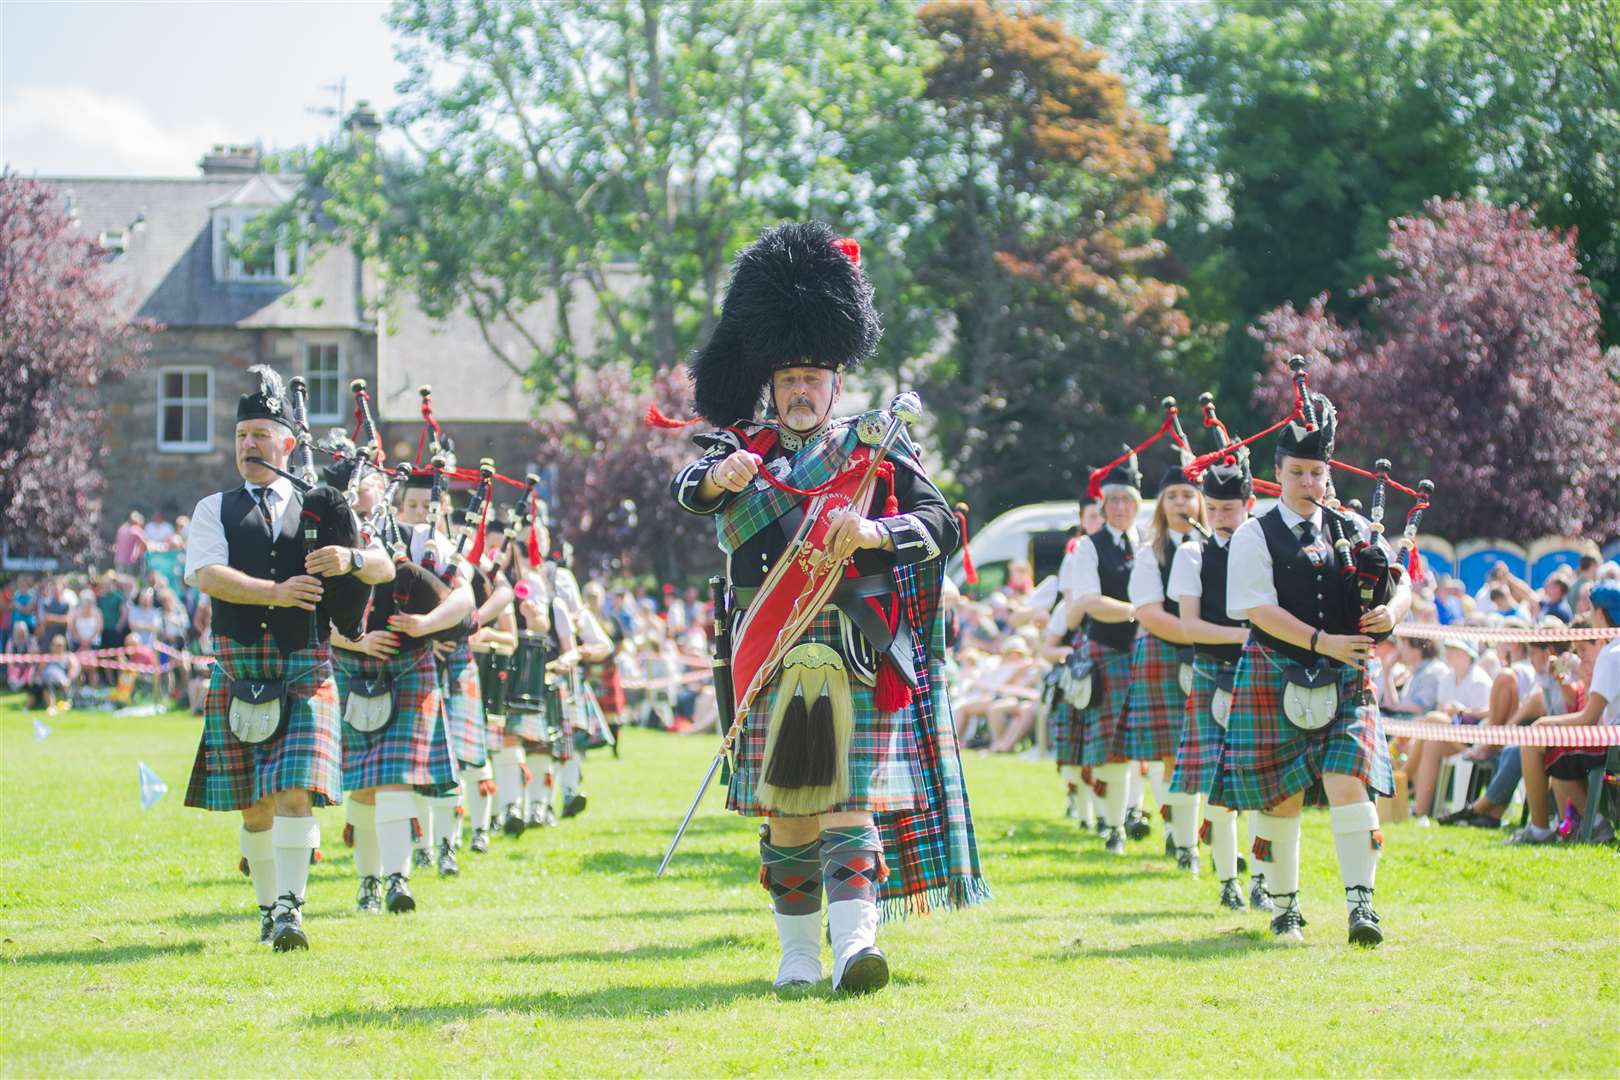 Strathisla Pipe Band take to the field at Aberlour Strathspey Highland Games last year. Picture: Daniel Forsyth.